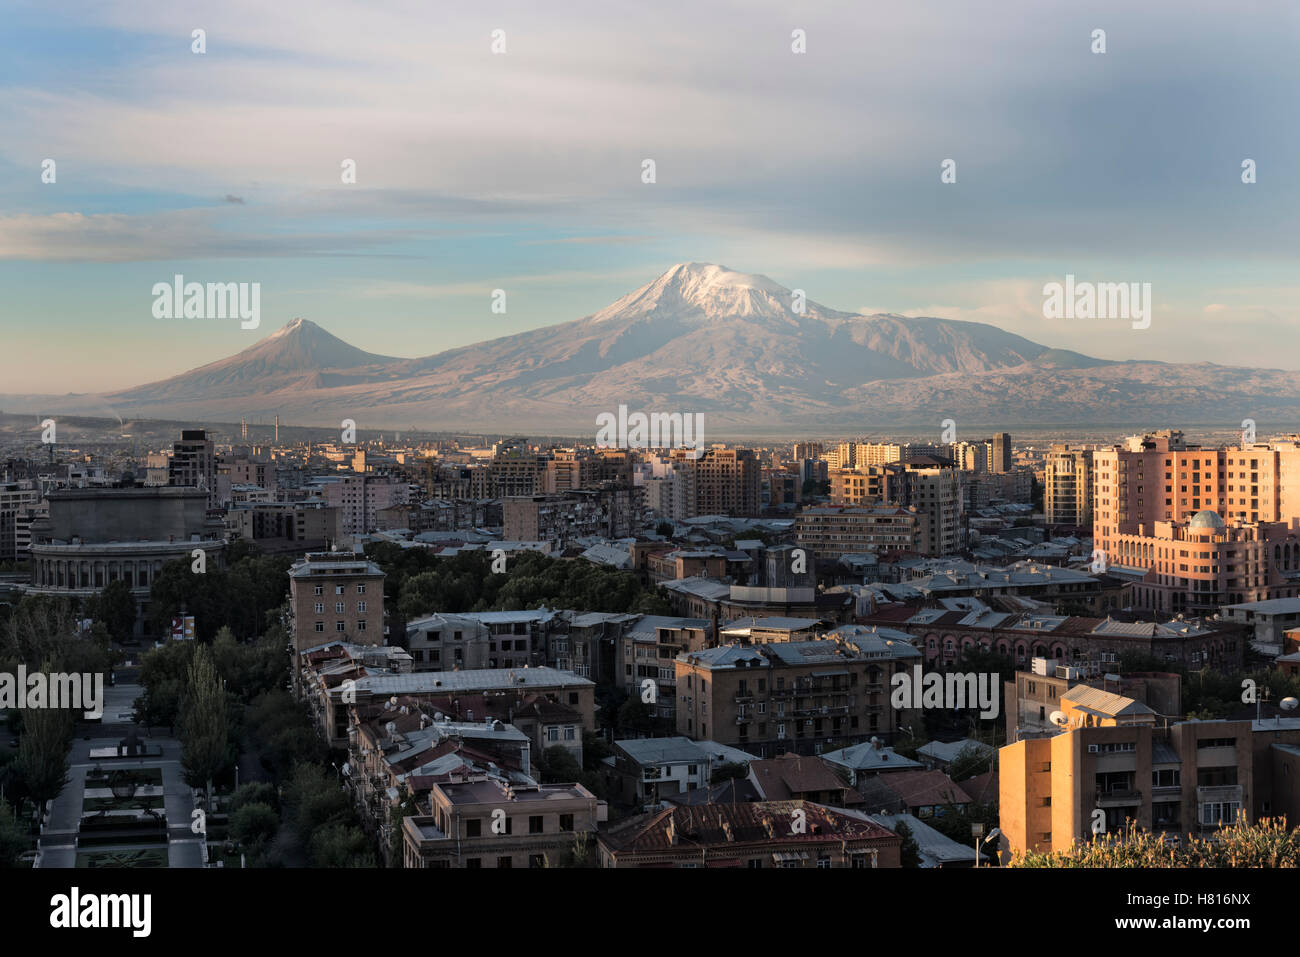 Mount Ararat and Yerevan viewed from Cascade at sunrise, Yerevan, Armenia, Middle East, Asia Stock Photo